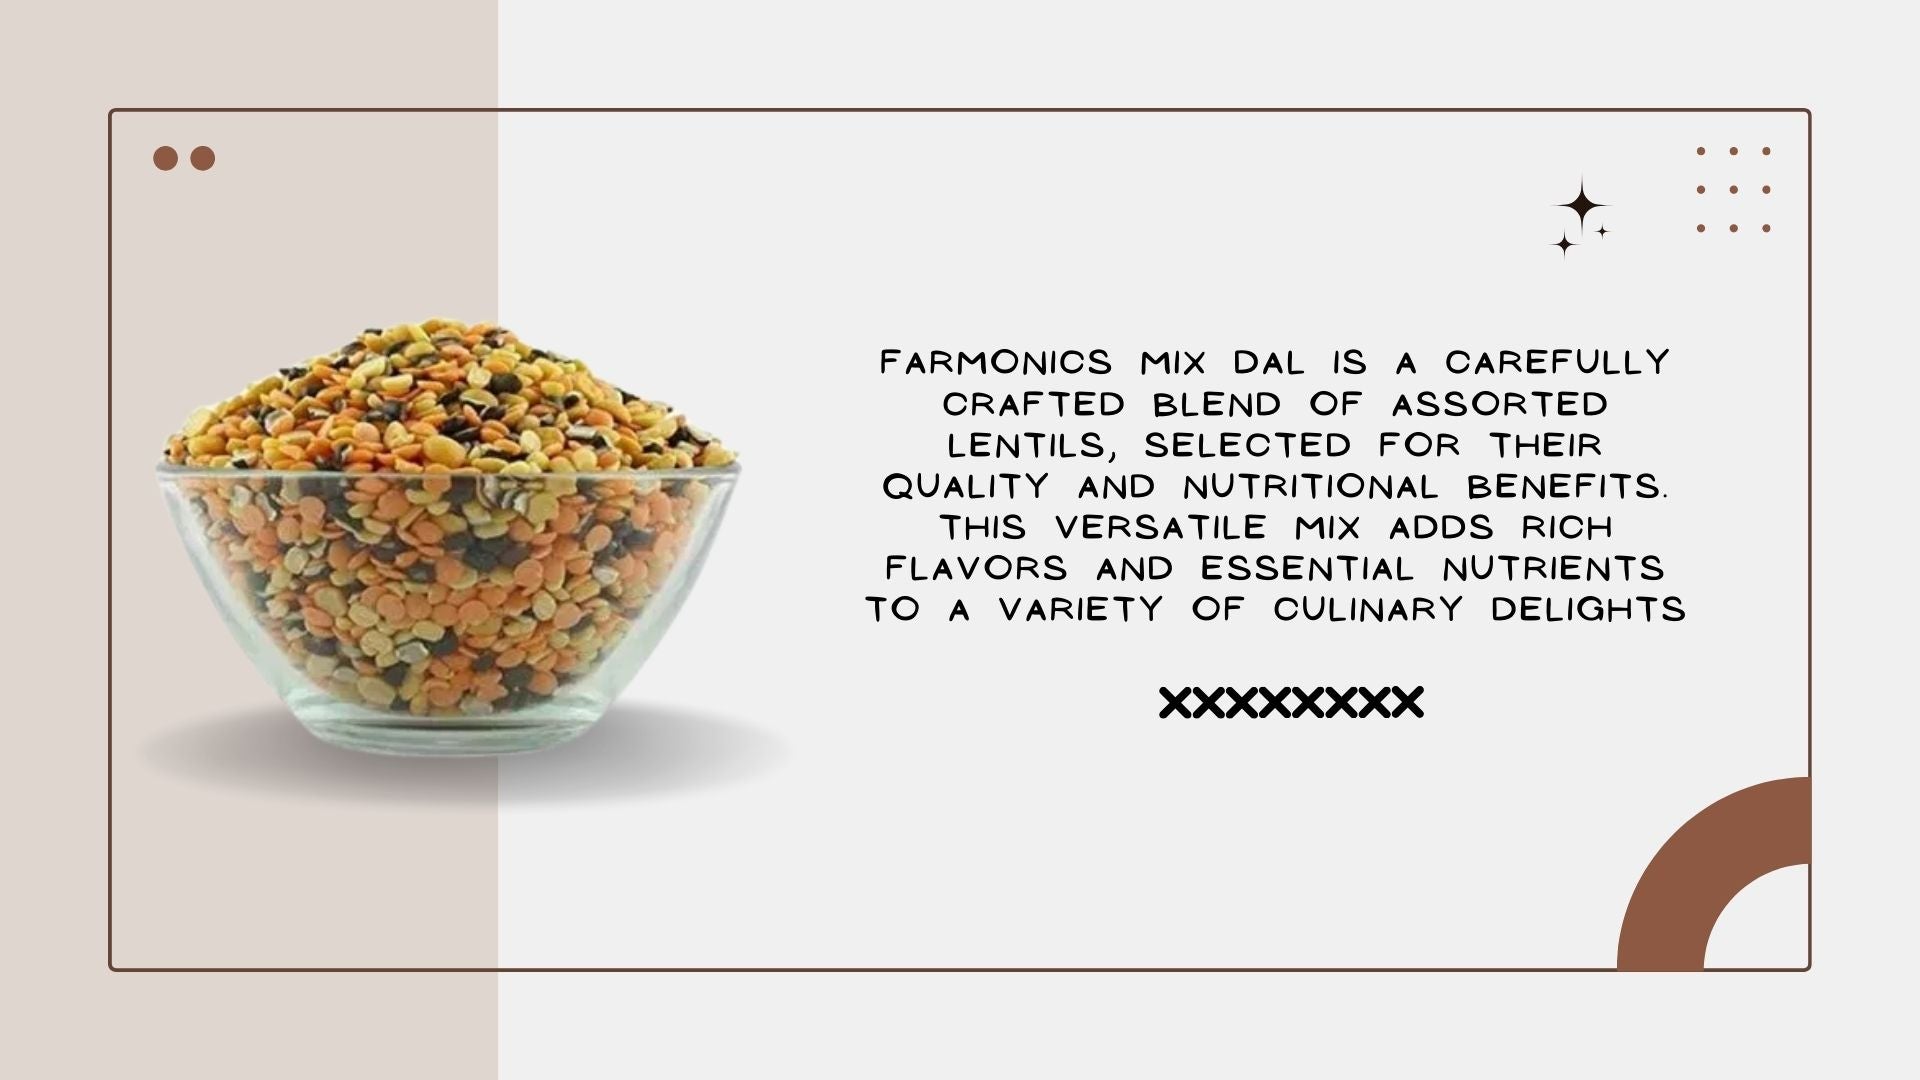 here are some of the informtaion of farmonics unpolished mix dal 